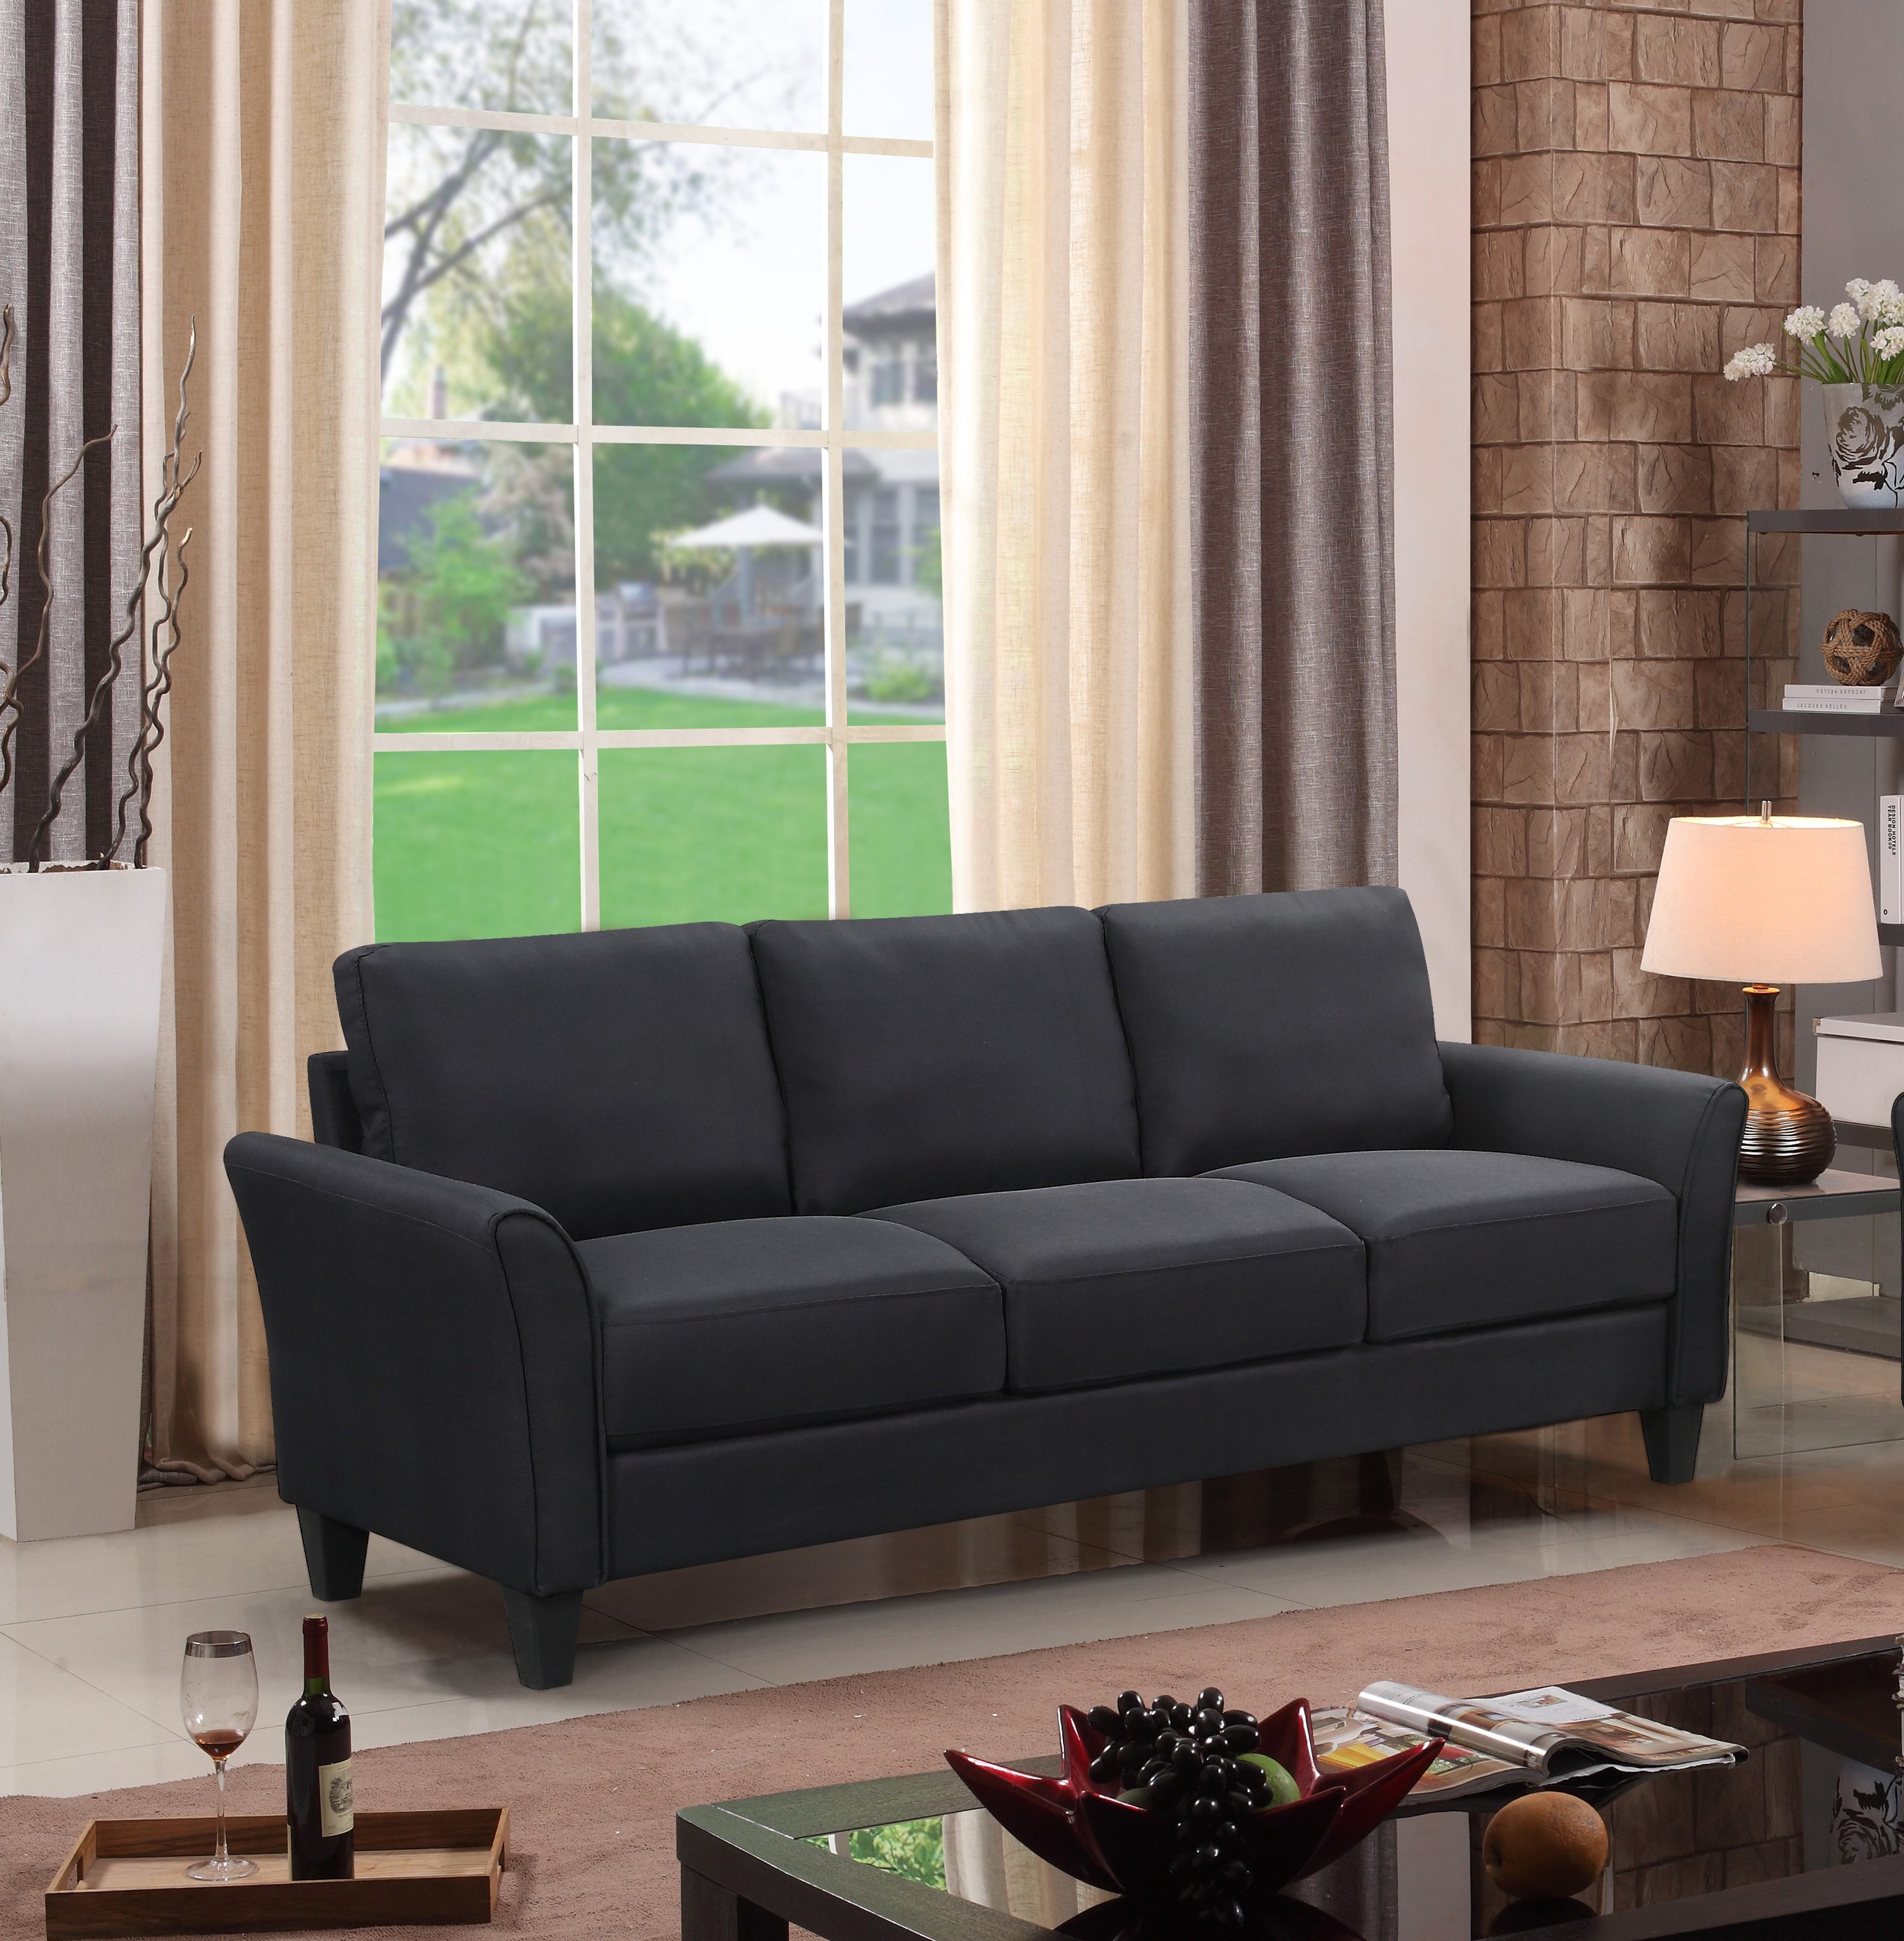 Clihome Glam Black Sectional at Lowes.com